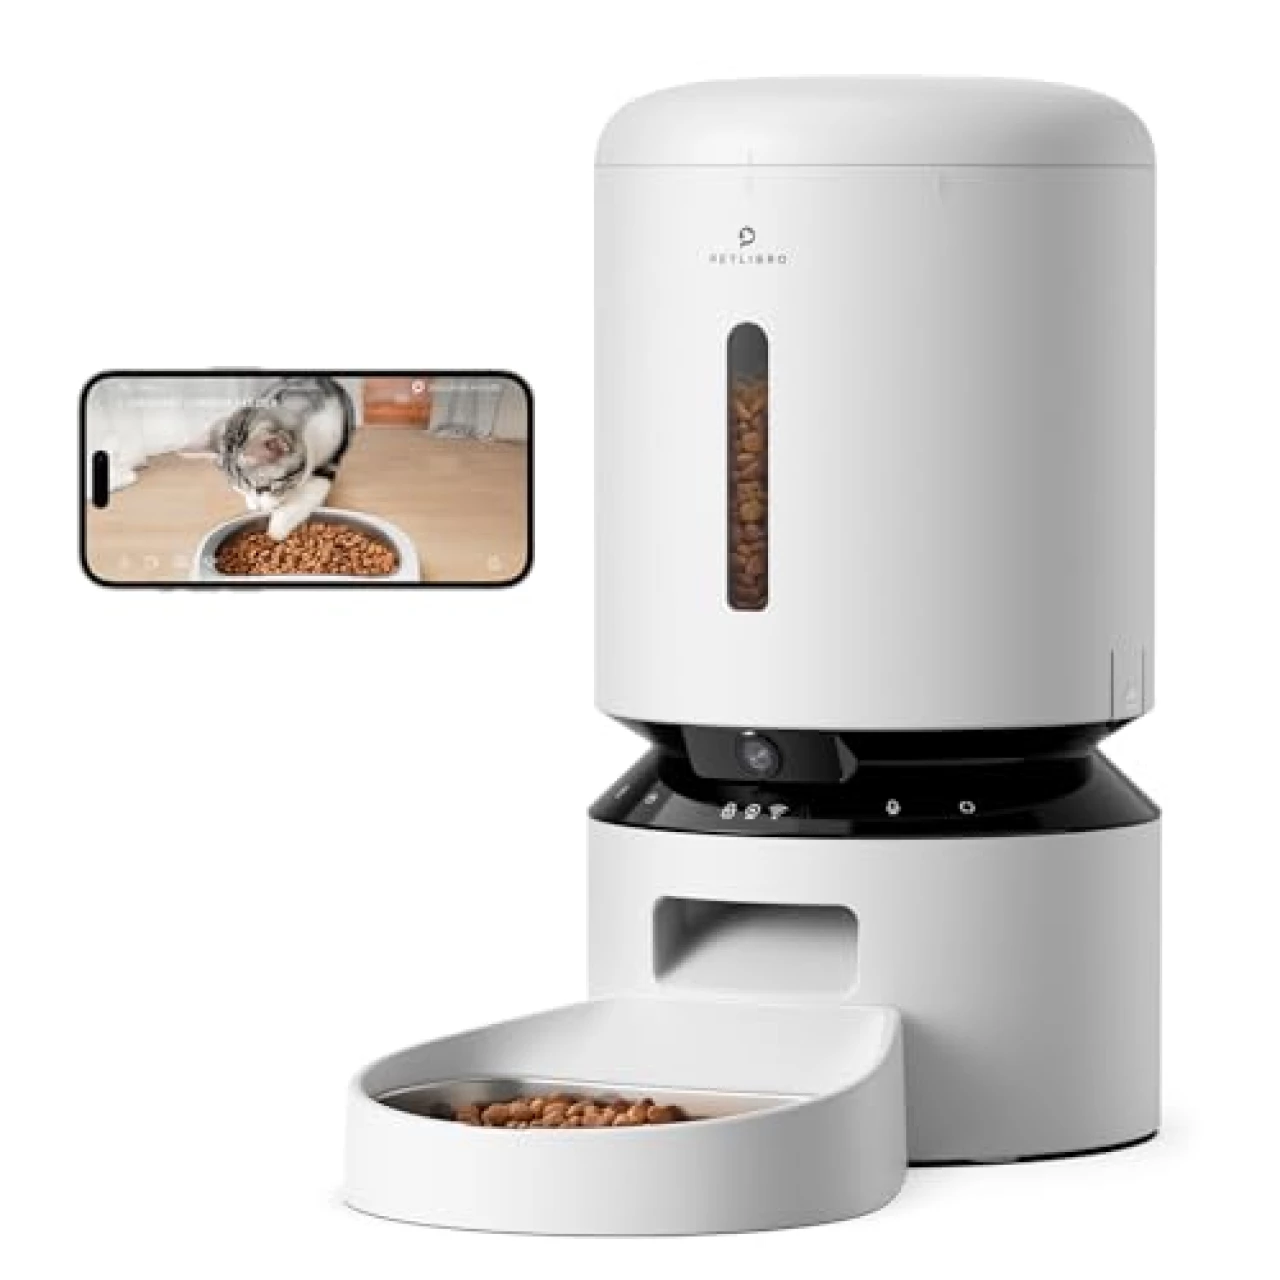 PETLIBRO Automatic Cat Feeder with Camera, 1080P HD Video with Night Vision, 5G WiFi Pet Feeder with 2-Way Audio, Low Food &amp; Blockage Sensor, Motion &amp; Sound Alerts for Cat &amp; Dog Single Tray